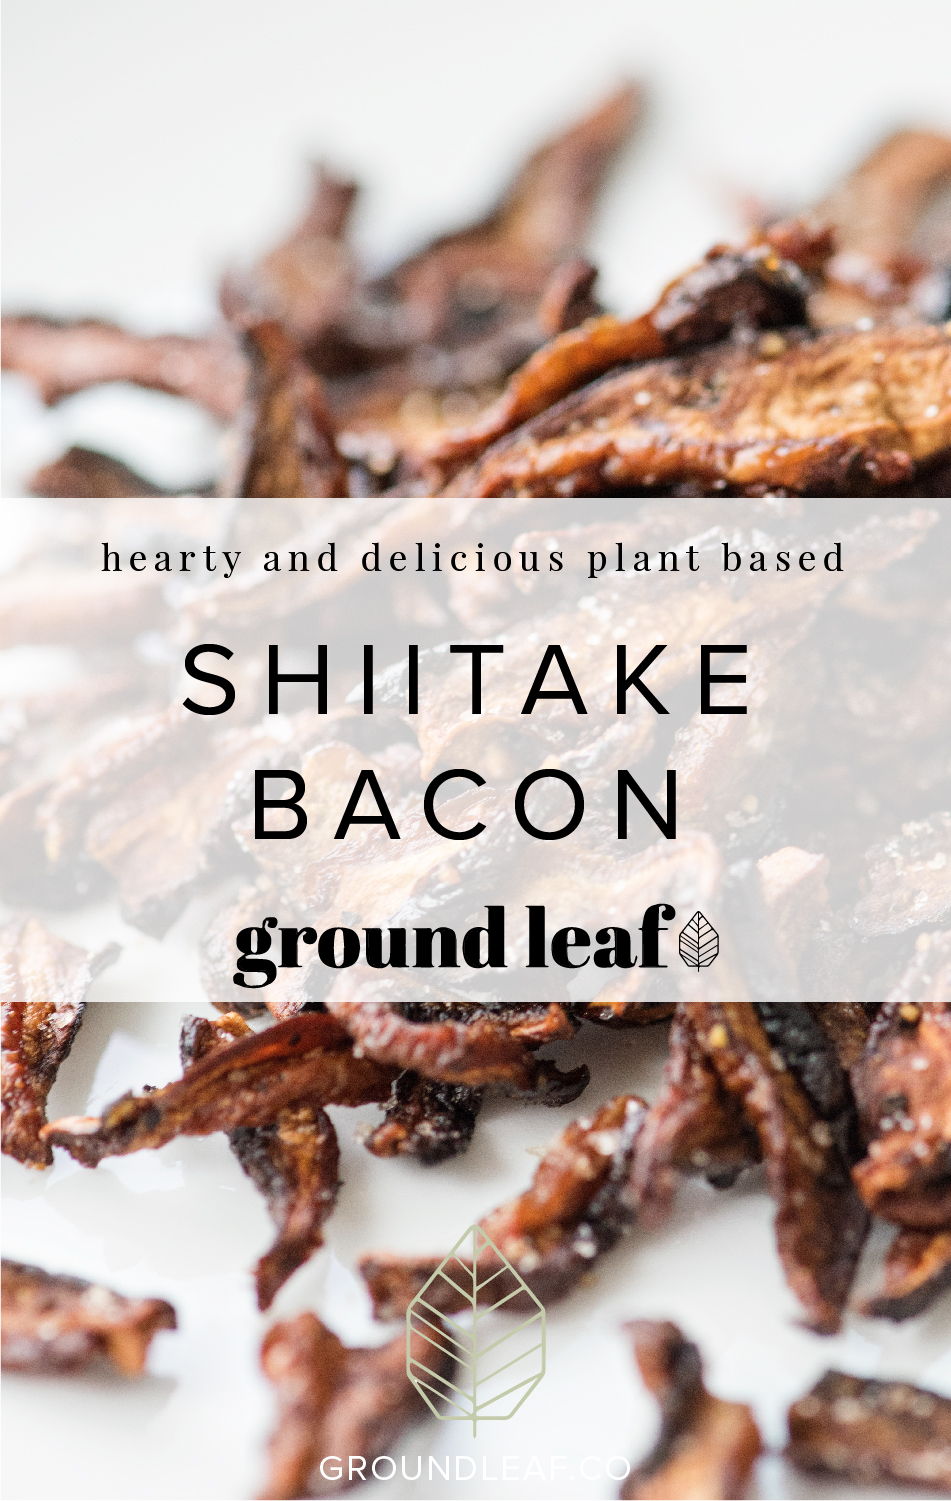 Shiitake bacon! Shiitake mushrooms are off-the-charts in their healing properties, and are renowned for their anti-inflammatory benefits. Pork bacon can NOT say the same. This shiitake bacon makes any plant-based BLT just as delicious as a meat-based one. And you can keep that fat-filled oil on the shelf.